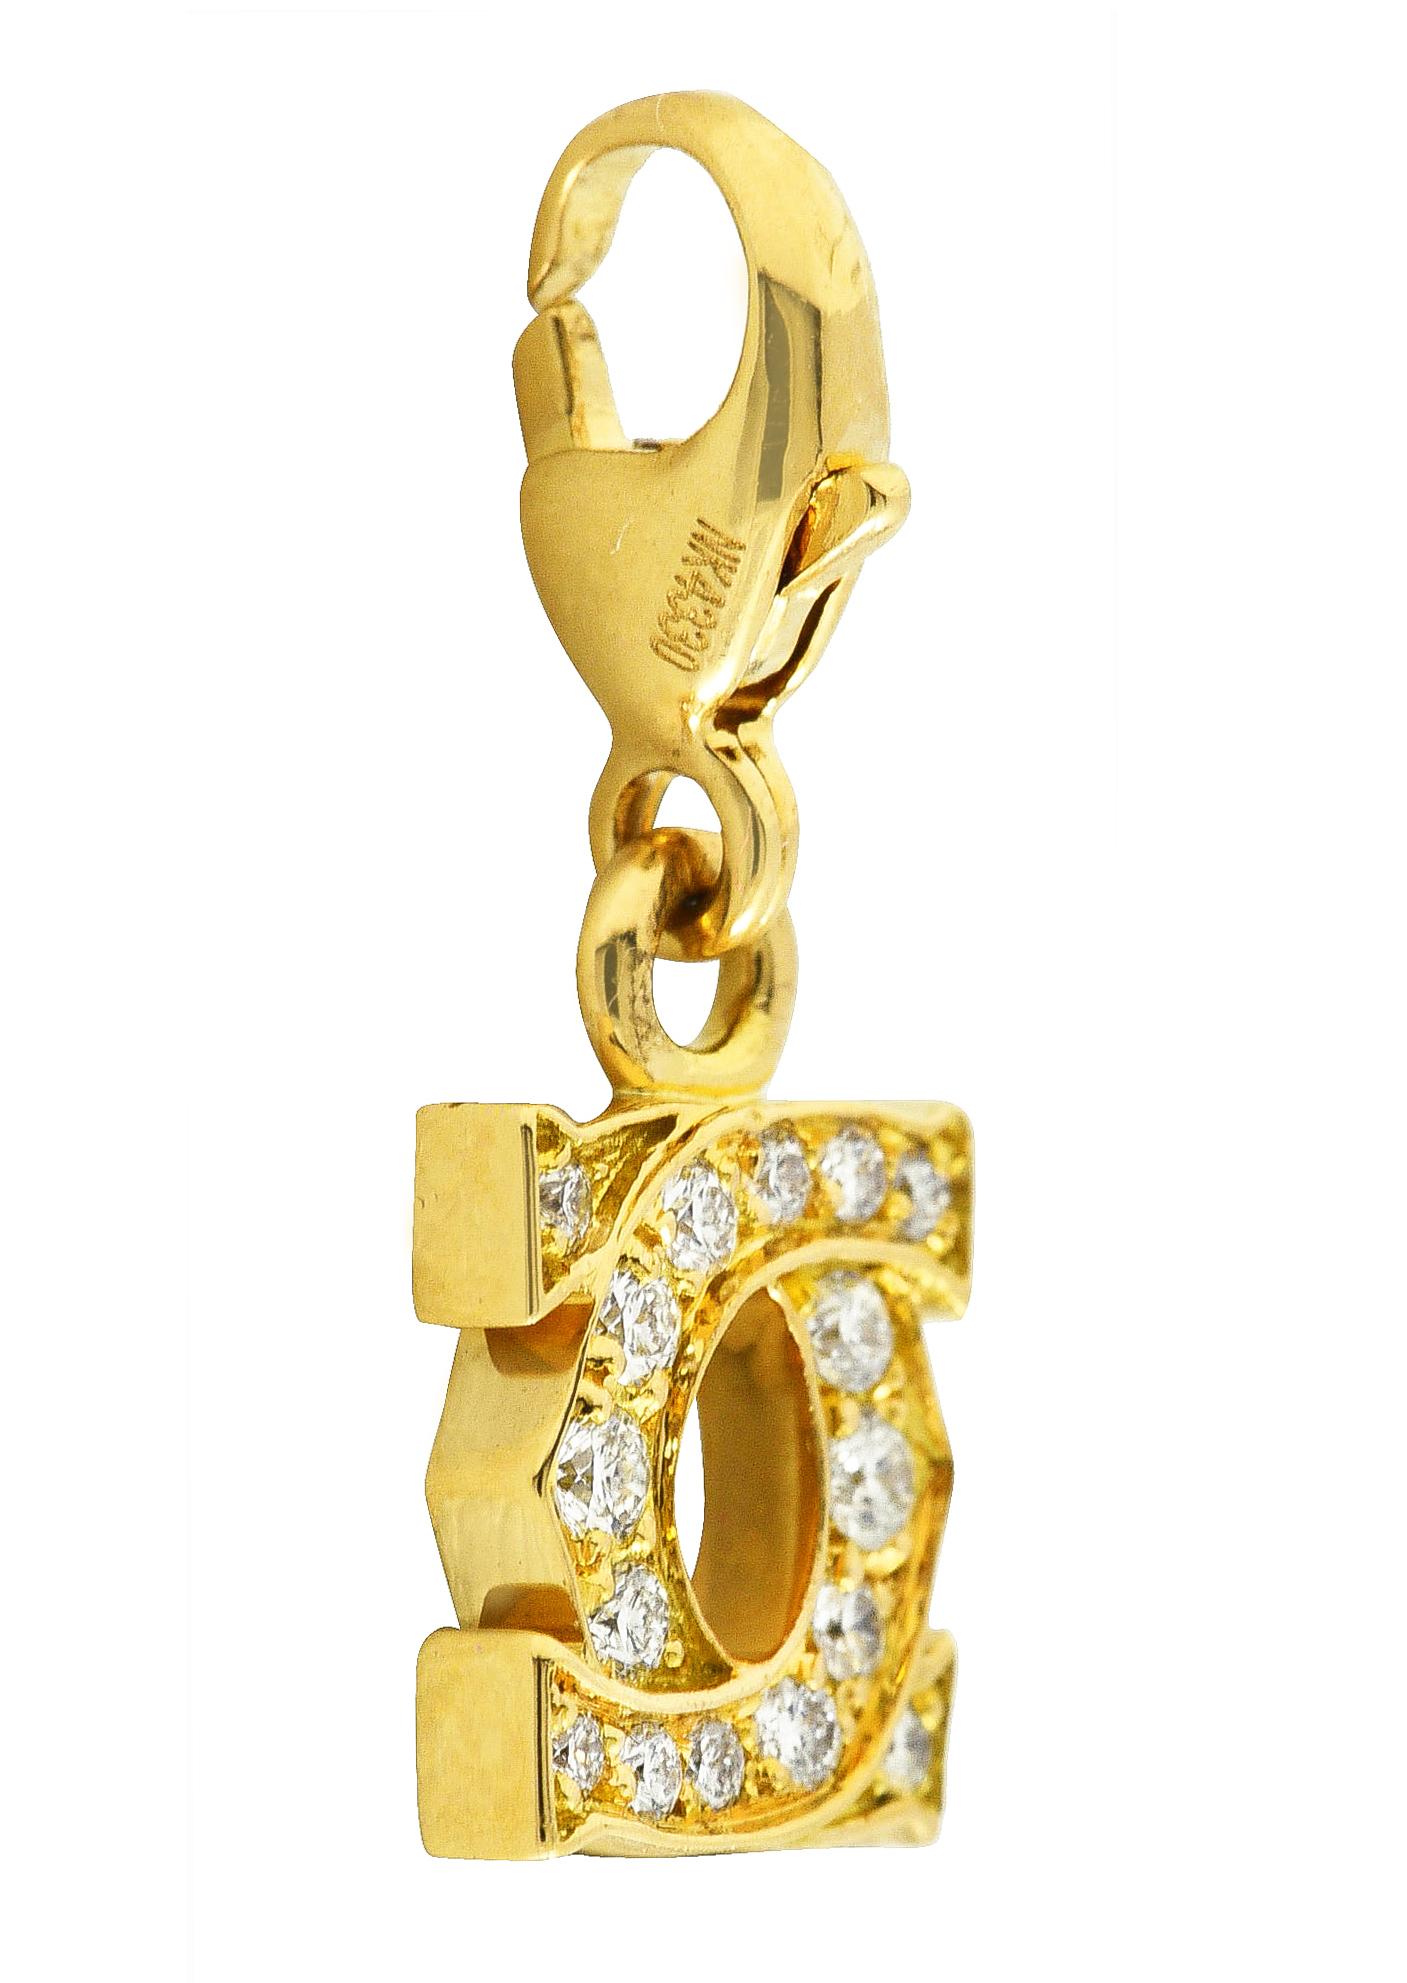 Charm is designed as Cartier's iconic double C logo

Bead set with round brilliant cut diamonds

Weighing in total approximately 0.25 carat with F/G color and VS clarity

Completed by a lobster clasp

Clasp is stamped 750 for 18 karat gold

Numbered